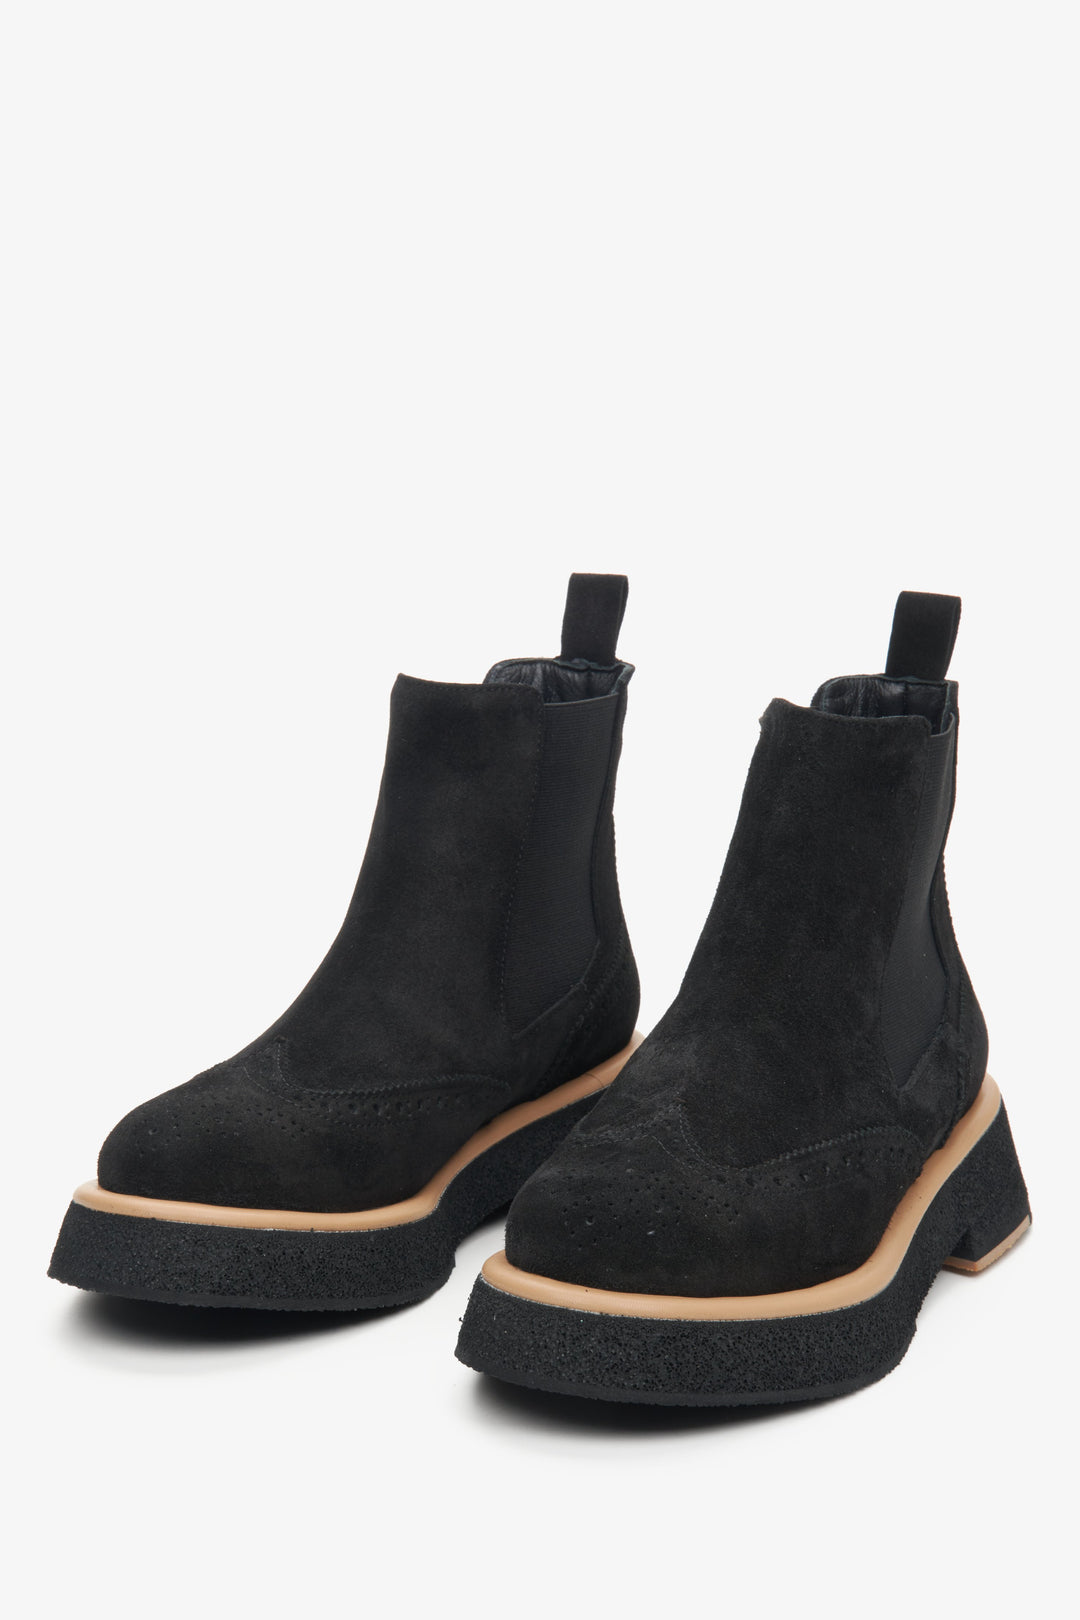 Women's black ankle boots by Estro - close-up on the toe cap.